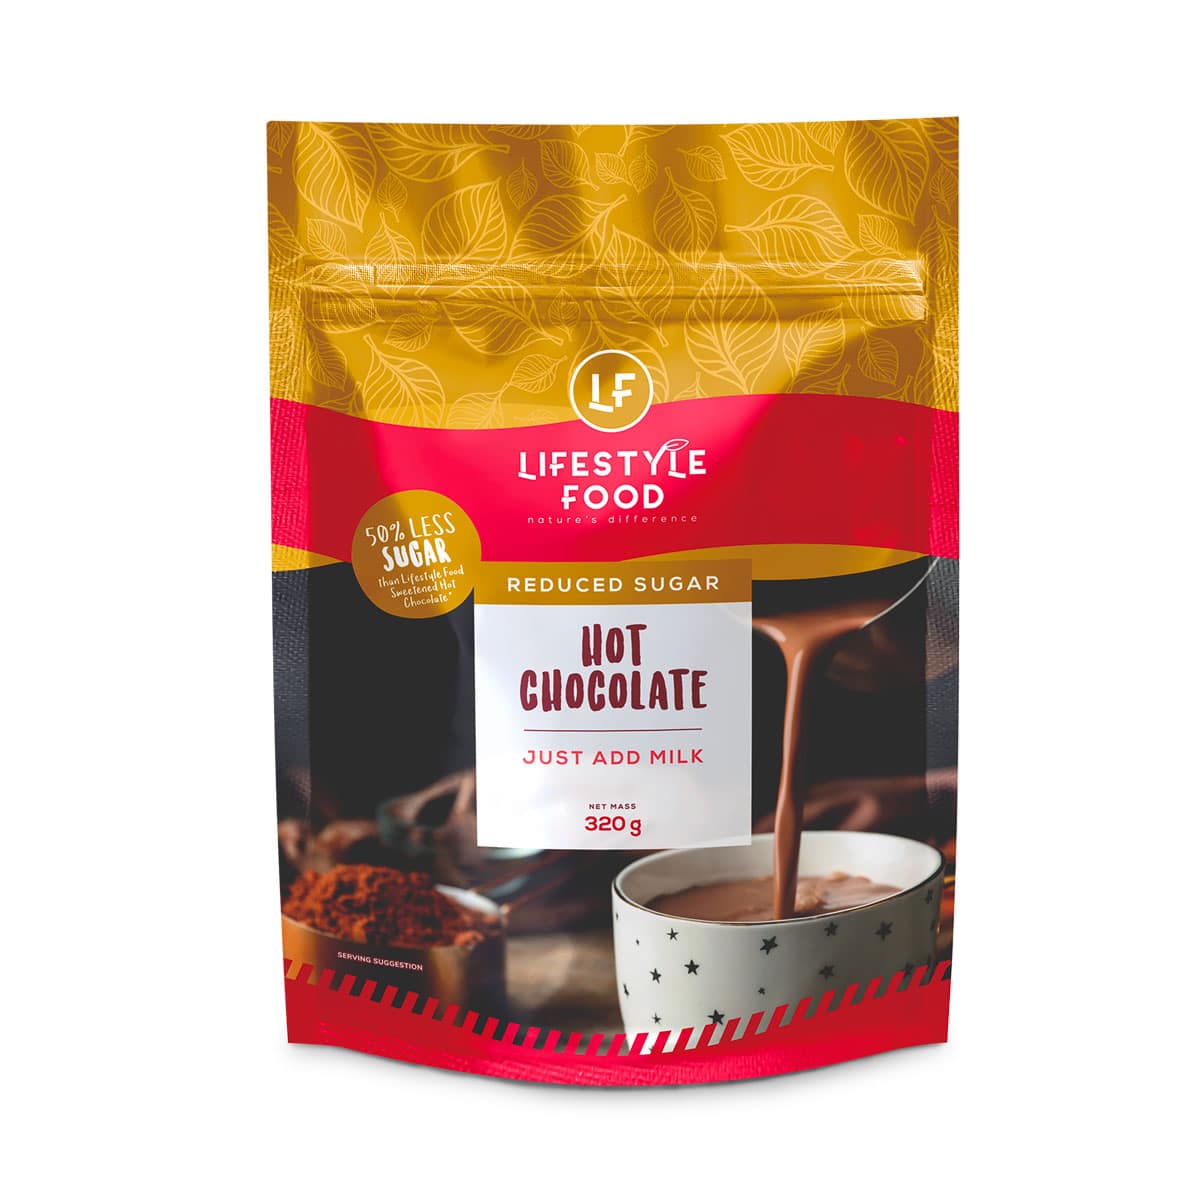 Lifestyle Food Reduced Sugar Hot Chocolate Refill - 400g